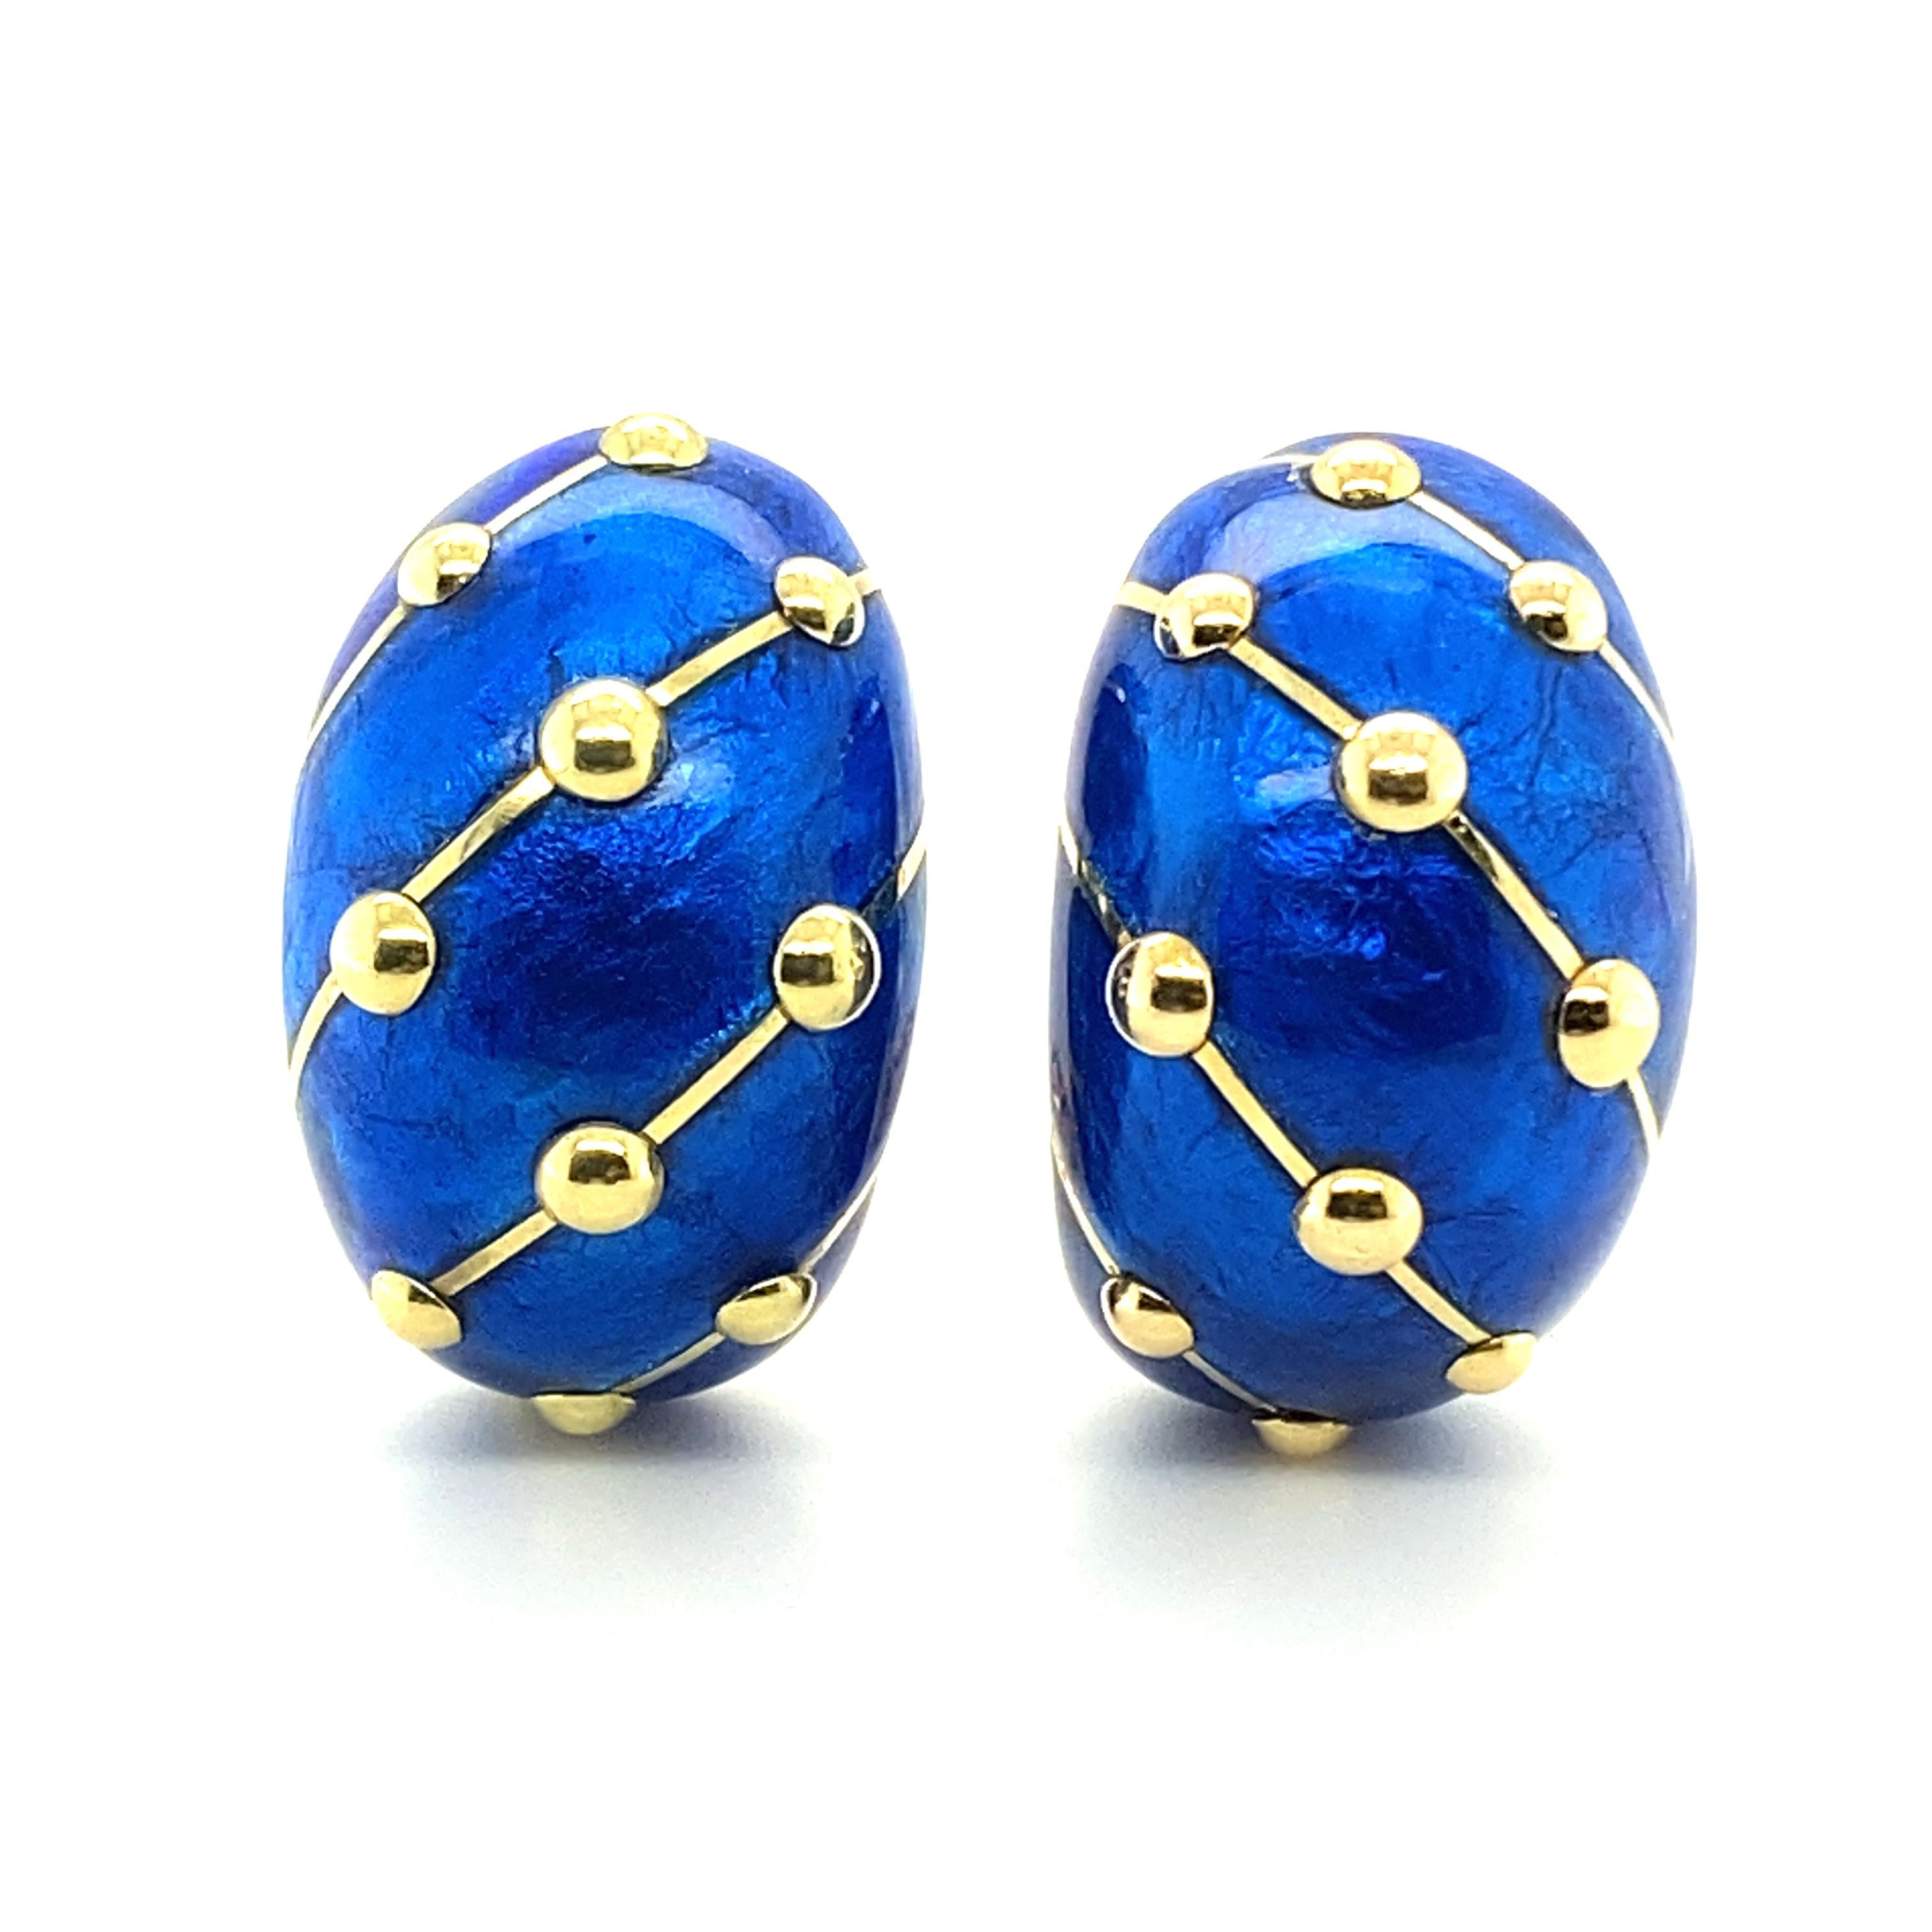 These beautiful earclips by the acclaimed French designer Jean Schlumberger are crafted in a luminous cobalt blue paillonné enamel and 18 karat yellow gold. Decorated with diagonal lines and three-dimensional dots in 18 karat yellow gold. A timeless